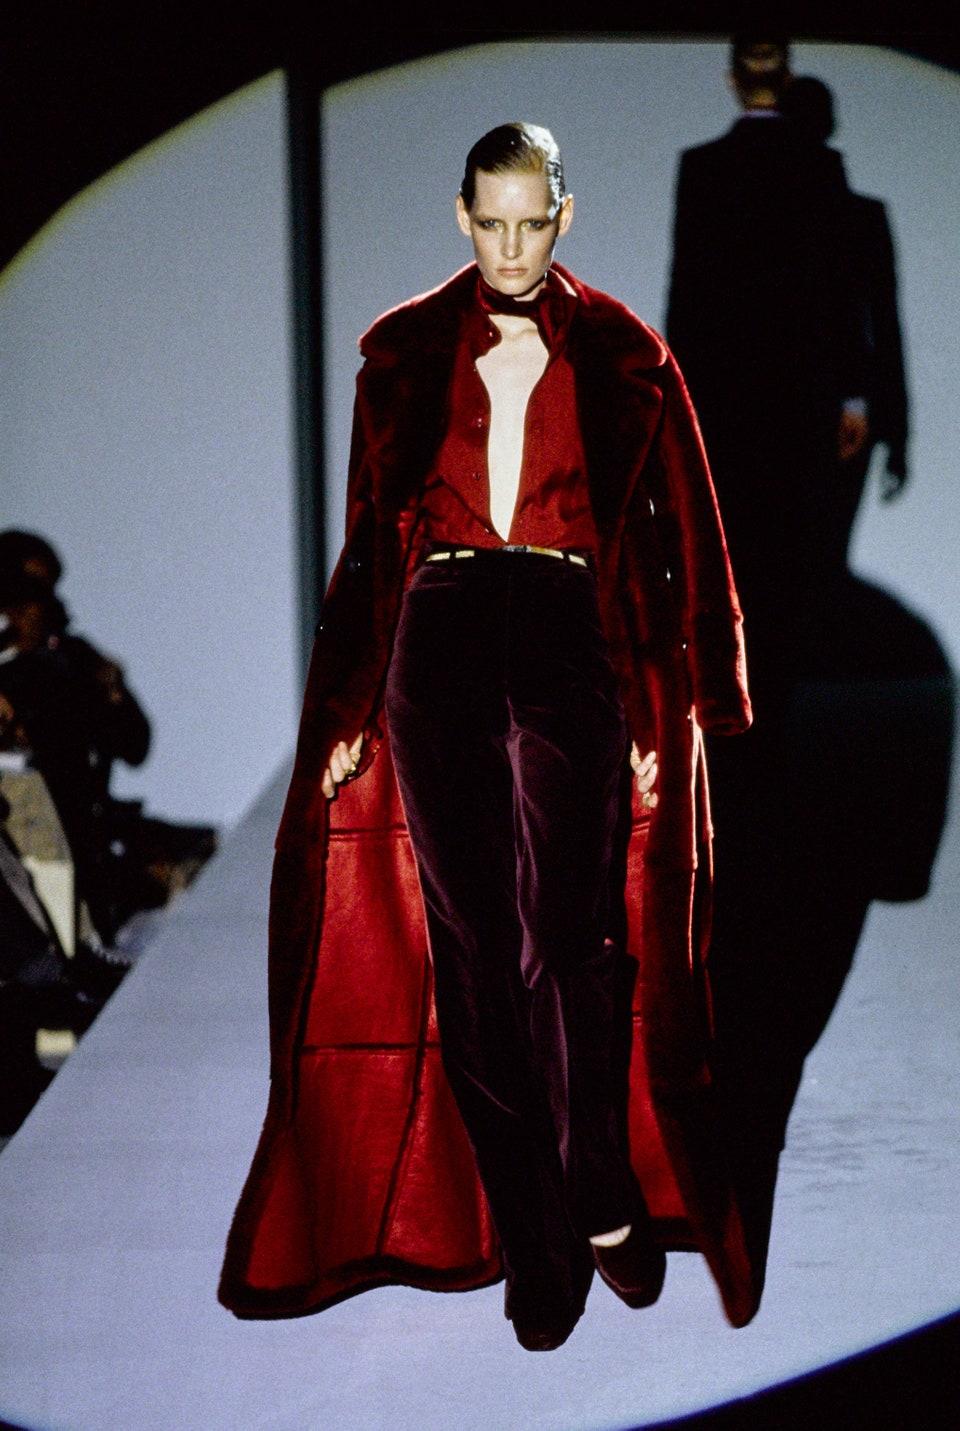 Presenting an incredible red shearling Gucci double-breasted coat, designed by Tom Ford. From the Fall/Winter 1996 collection, a similar full-length coat debuted on the season’s runway as part of look 42, modeled by Kirsten Owen. This luxurious coat